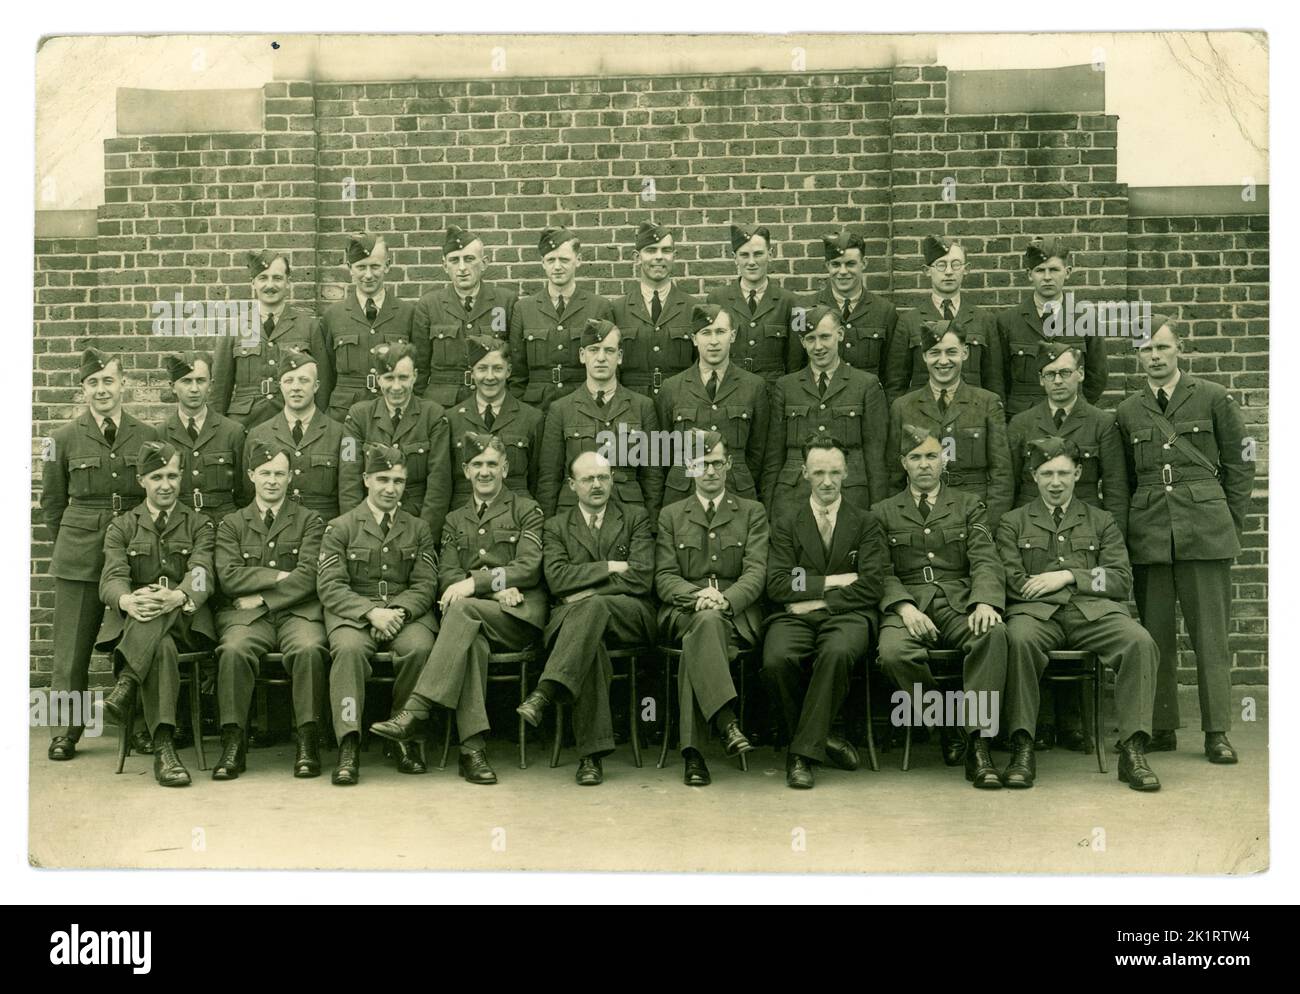 Original WW2 era Royal Air Force personnel (RAF) airmen wearing uniform of tunic and side caps. At air training school. There are examiners or non military personnel, pens in pockets sitting with them. Circa 1943, unknown location, U.K. Stock Photo